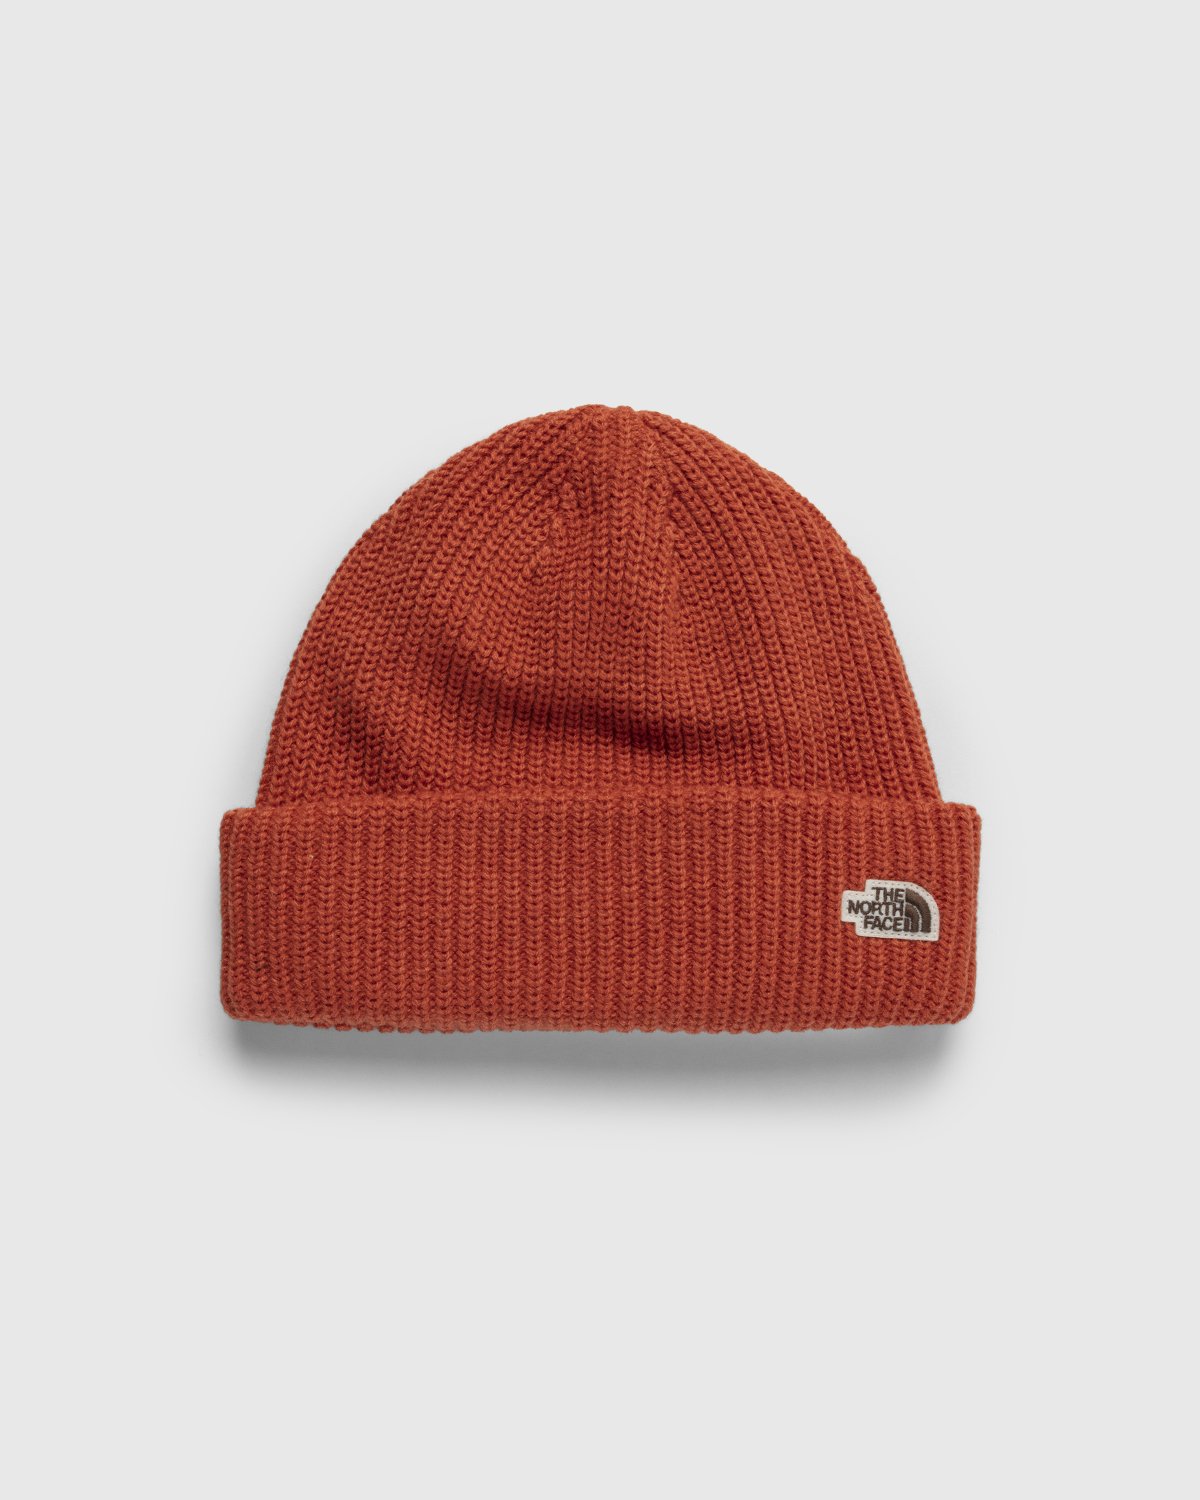 The North Face - Salty Dog Beanie Burntochre Moonlight Ivory - Accessories - Orange - Image 1